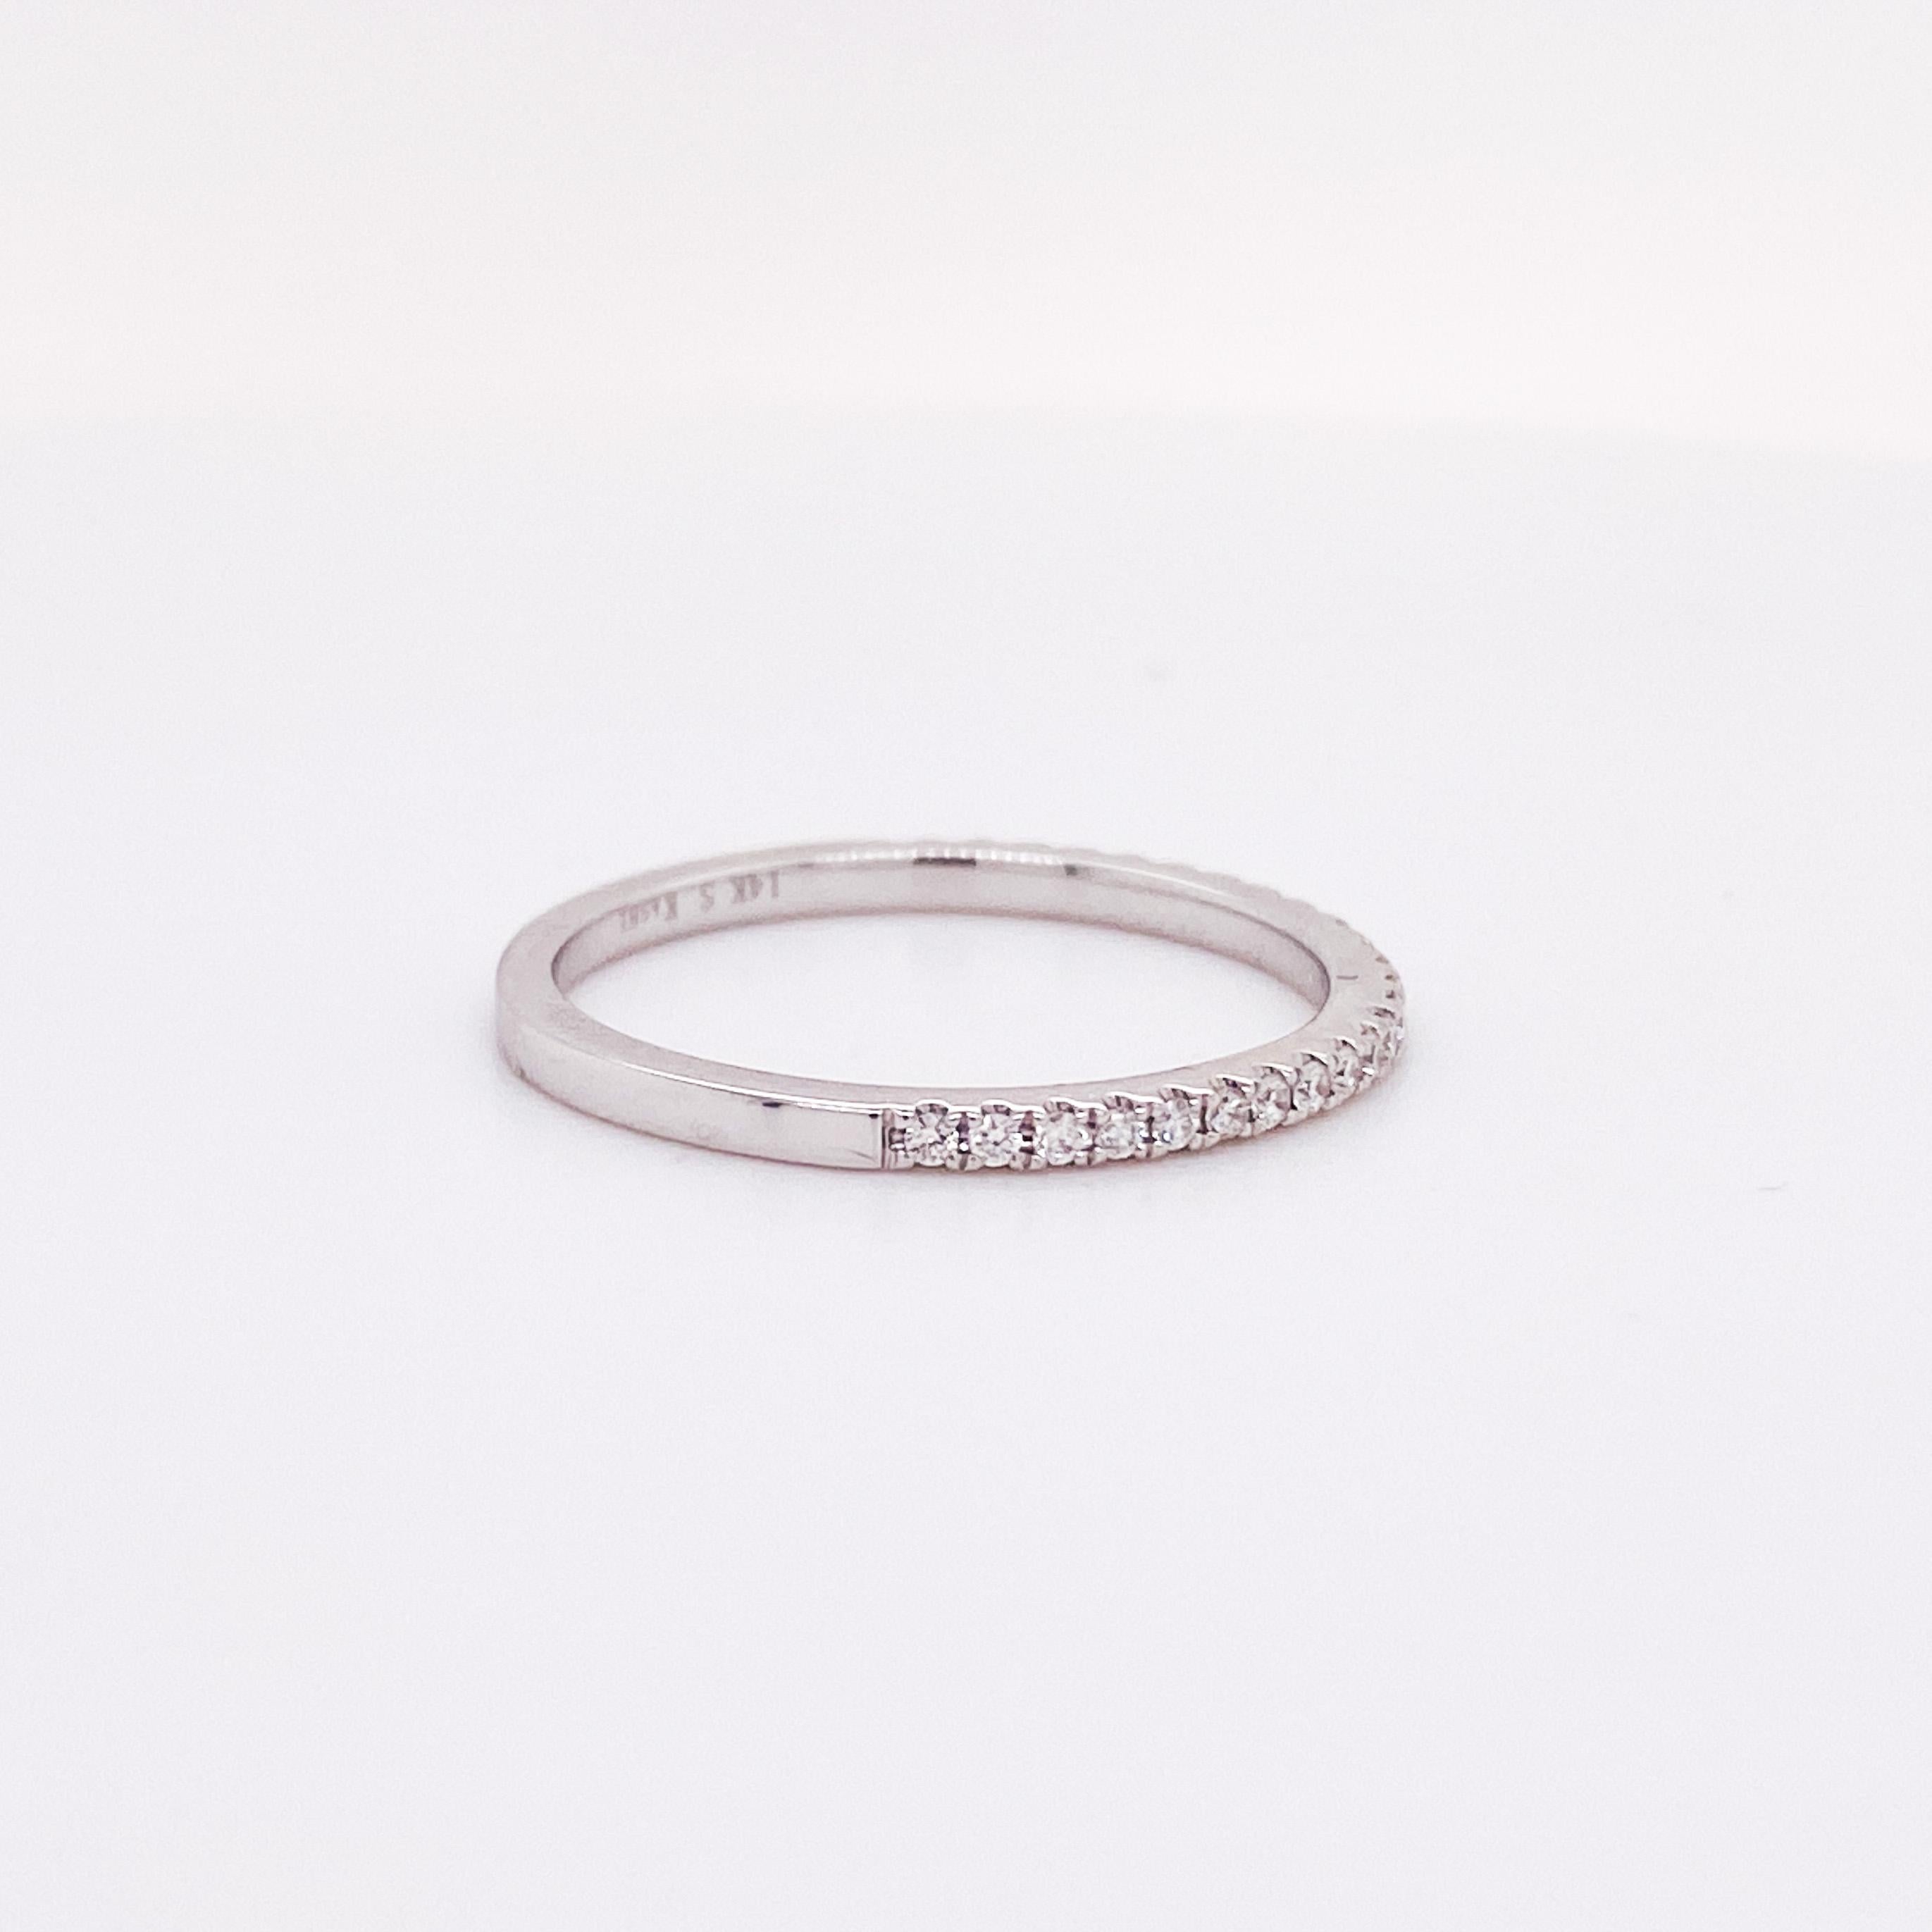 Pick your style. This flat-sided stackable band has you covered... Stack this ring with your other favorites and change your look any day. Wear this ring everyday from your loved one. Wear this ring any day because you love it. The ring we have here